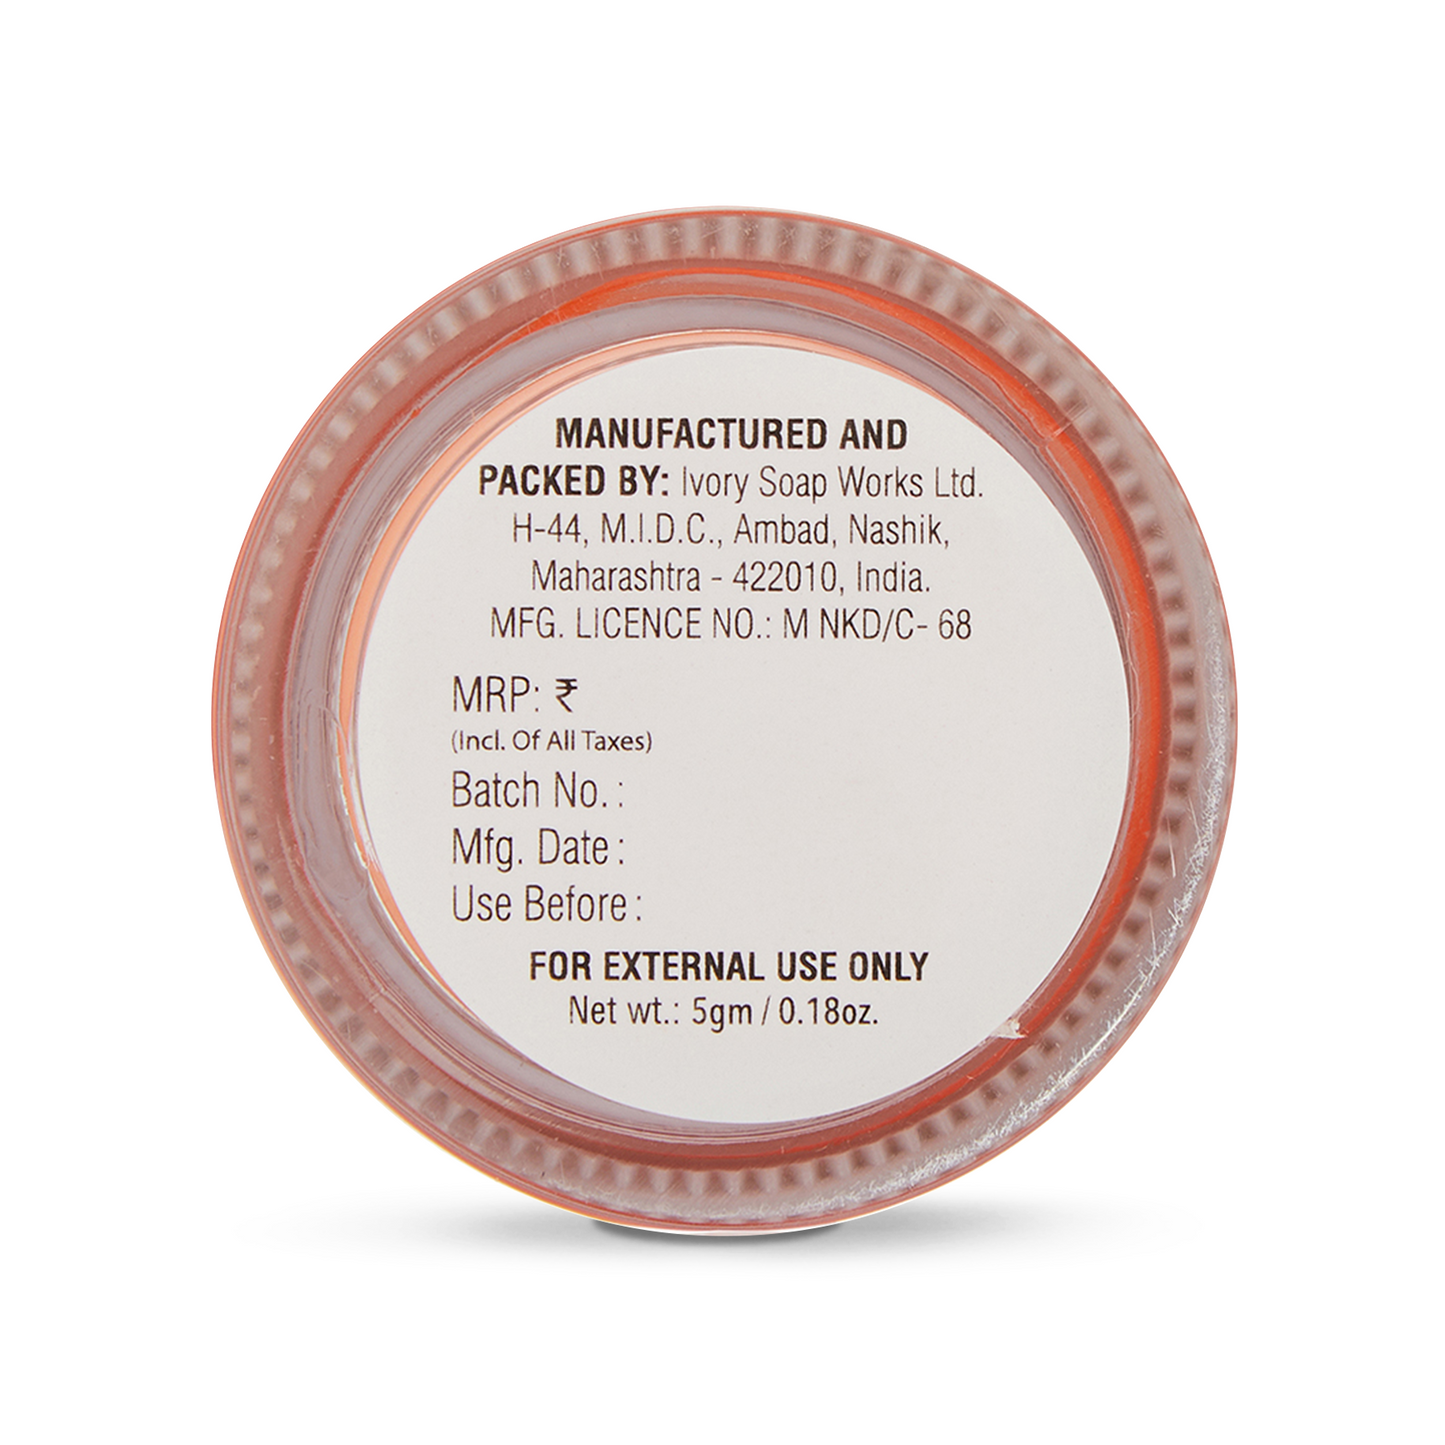 Fabessentials Apricot Peach Lip Butter infused with Shea Butter, 5gm